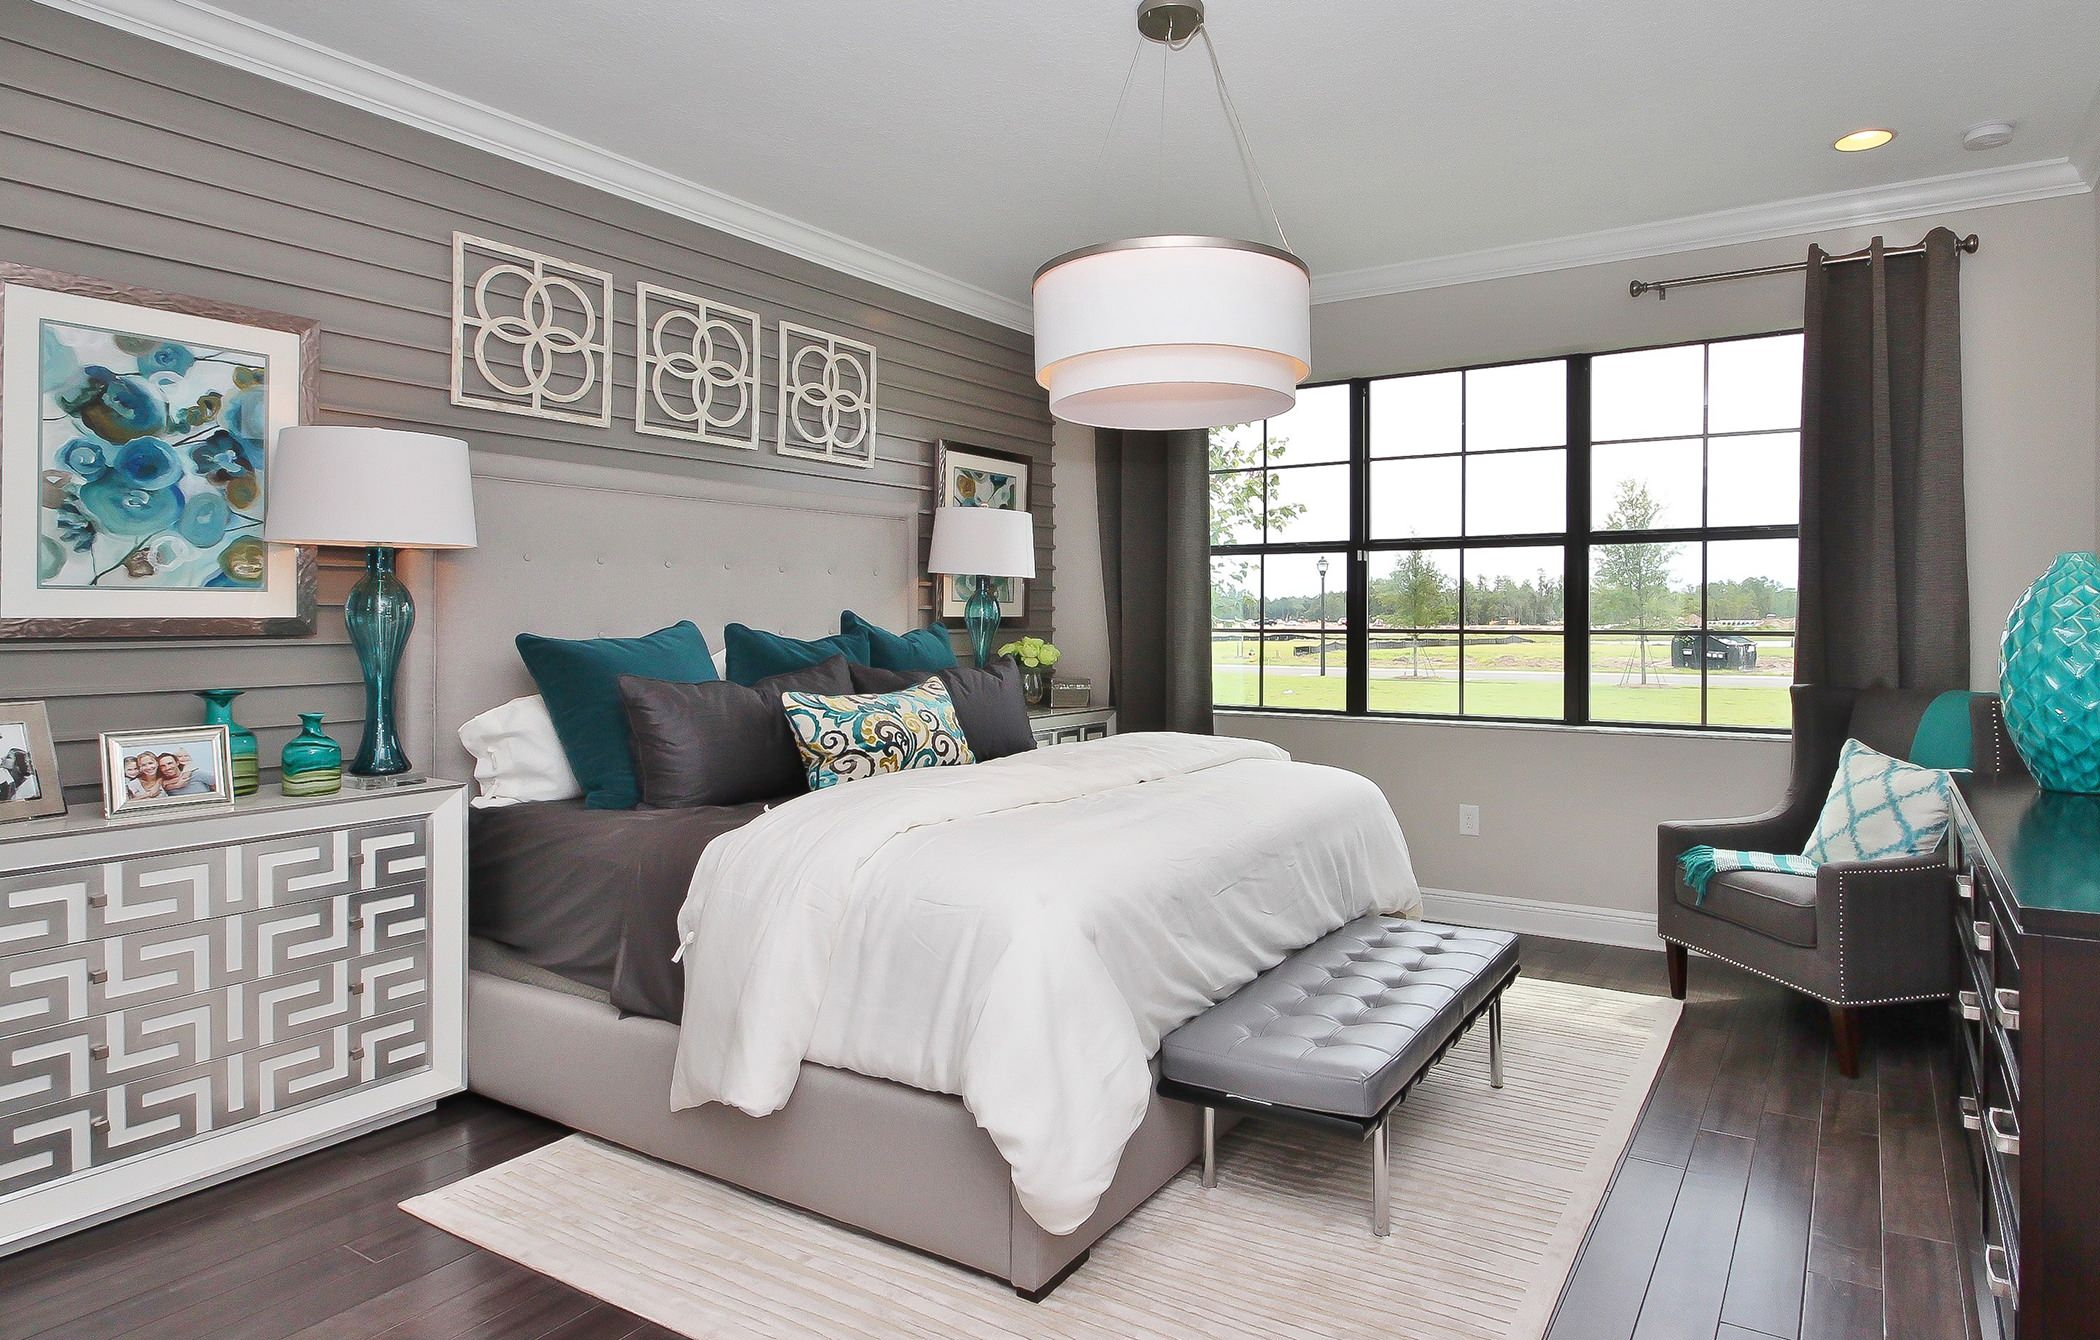 Lovely teal and grey bedroom ideas Turquoise And Gray Bedroom Ideas Photos Houzz